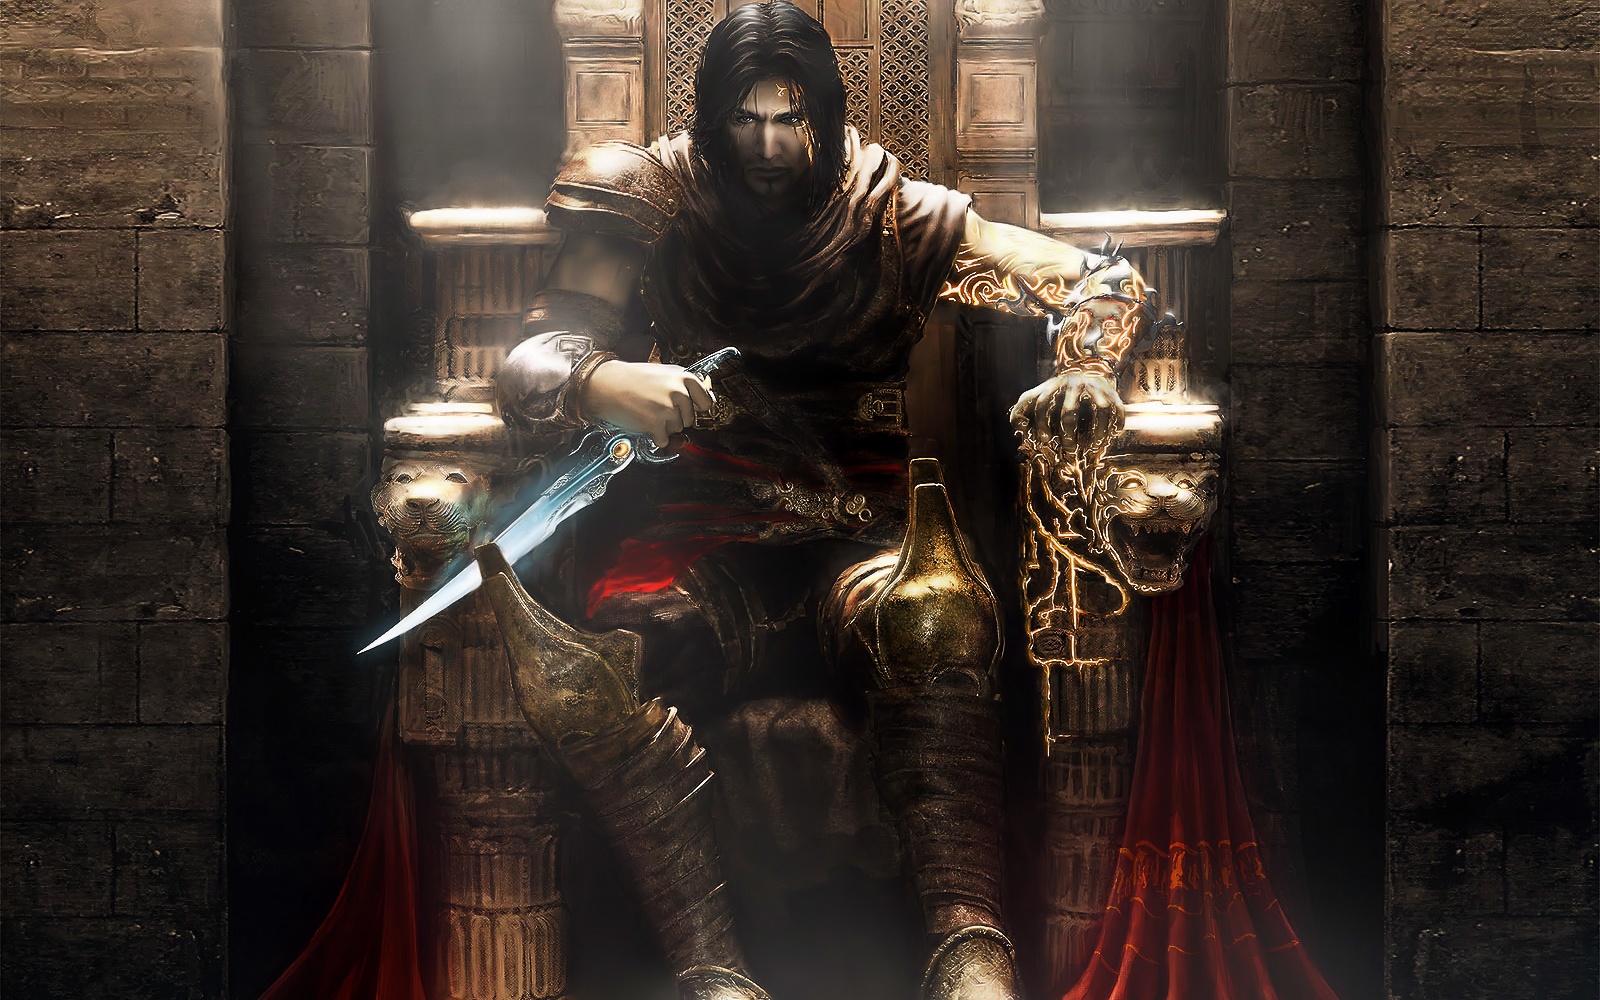 The Prince (Prince of Persia). He's just awesome as shit. End of story.